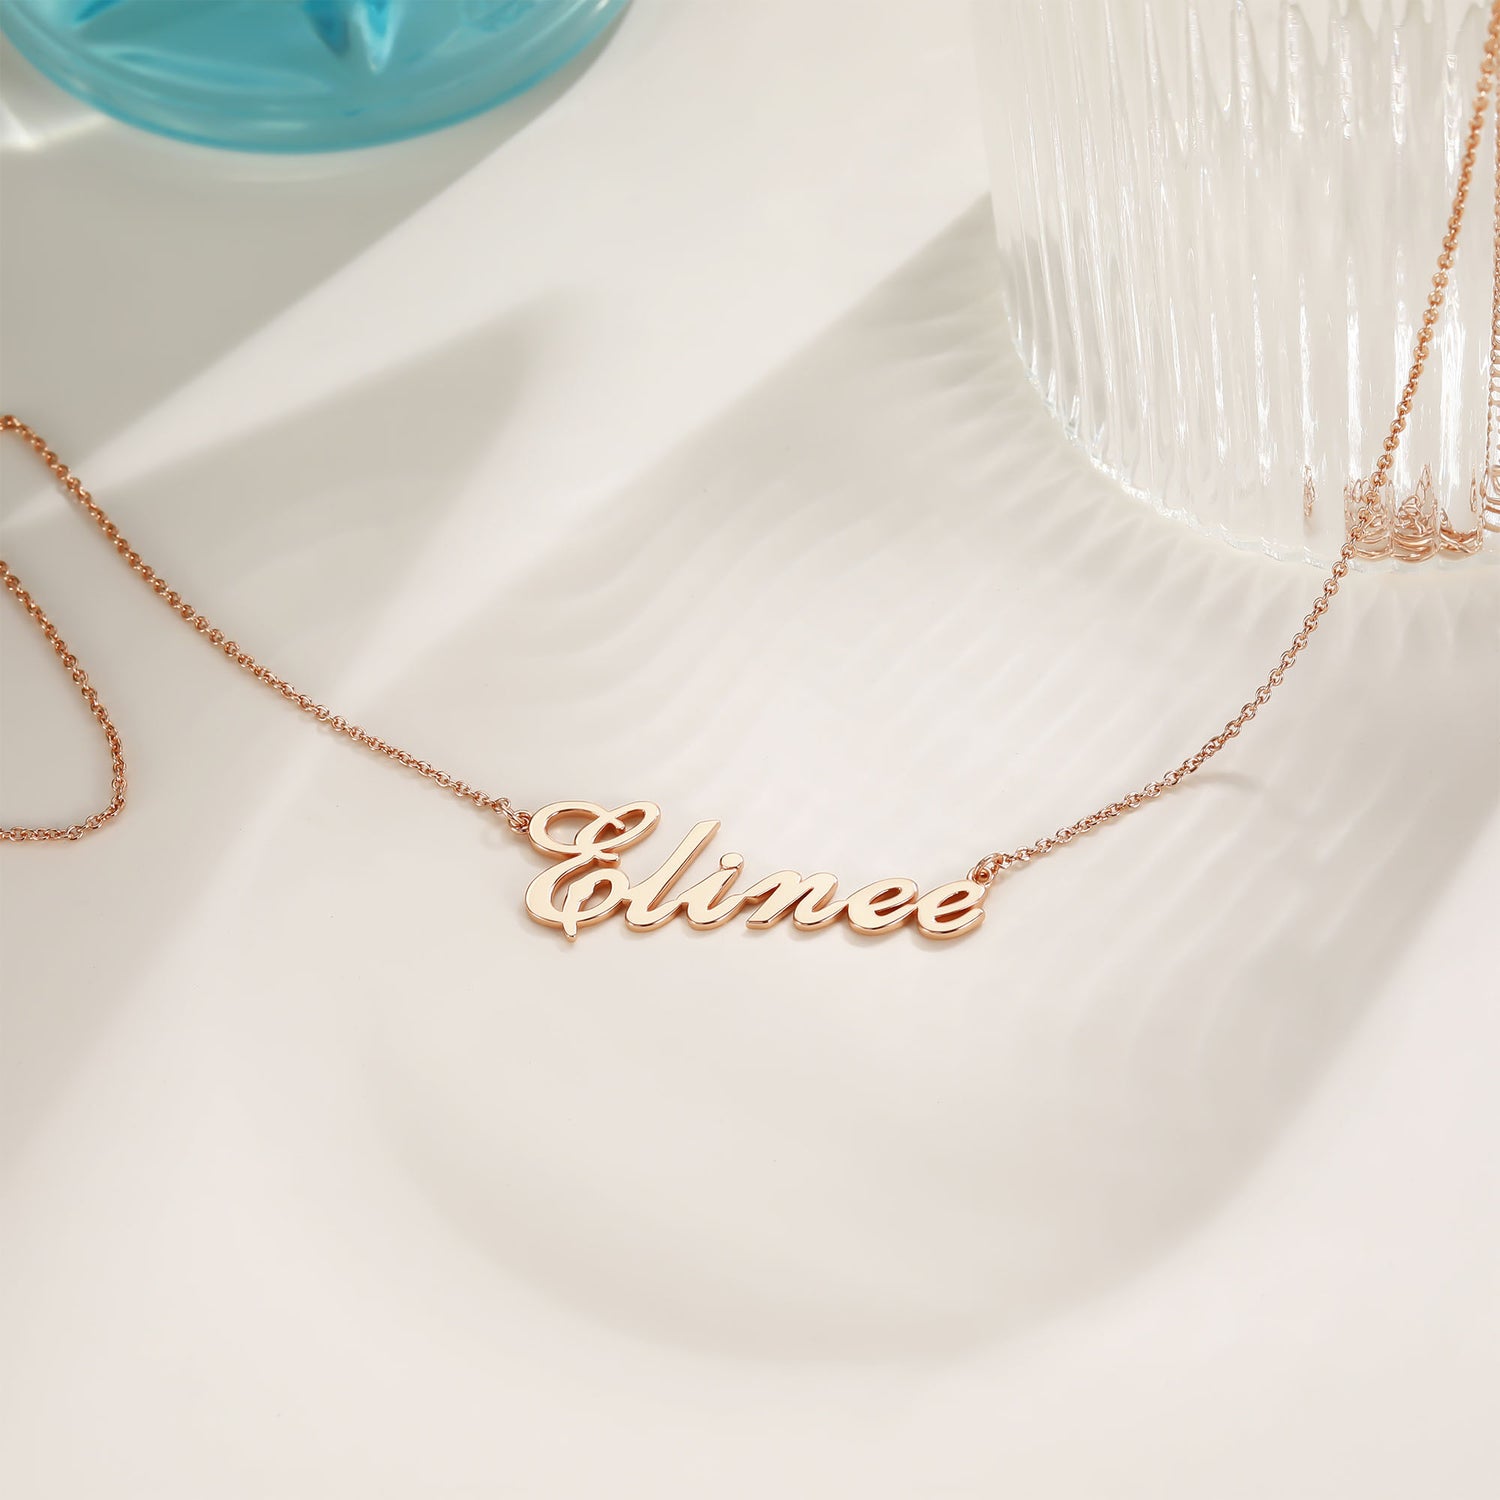 rose gold name necklace, name pendant, personalized necklace